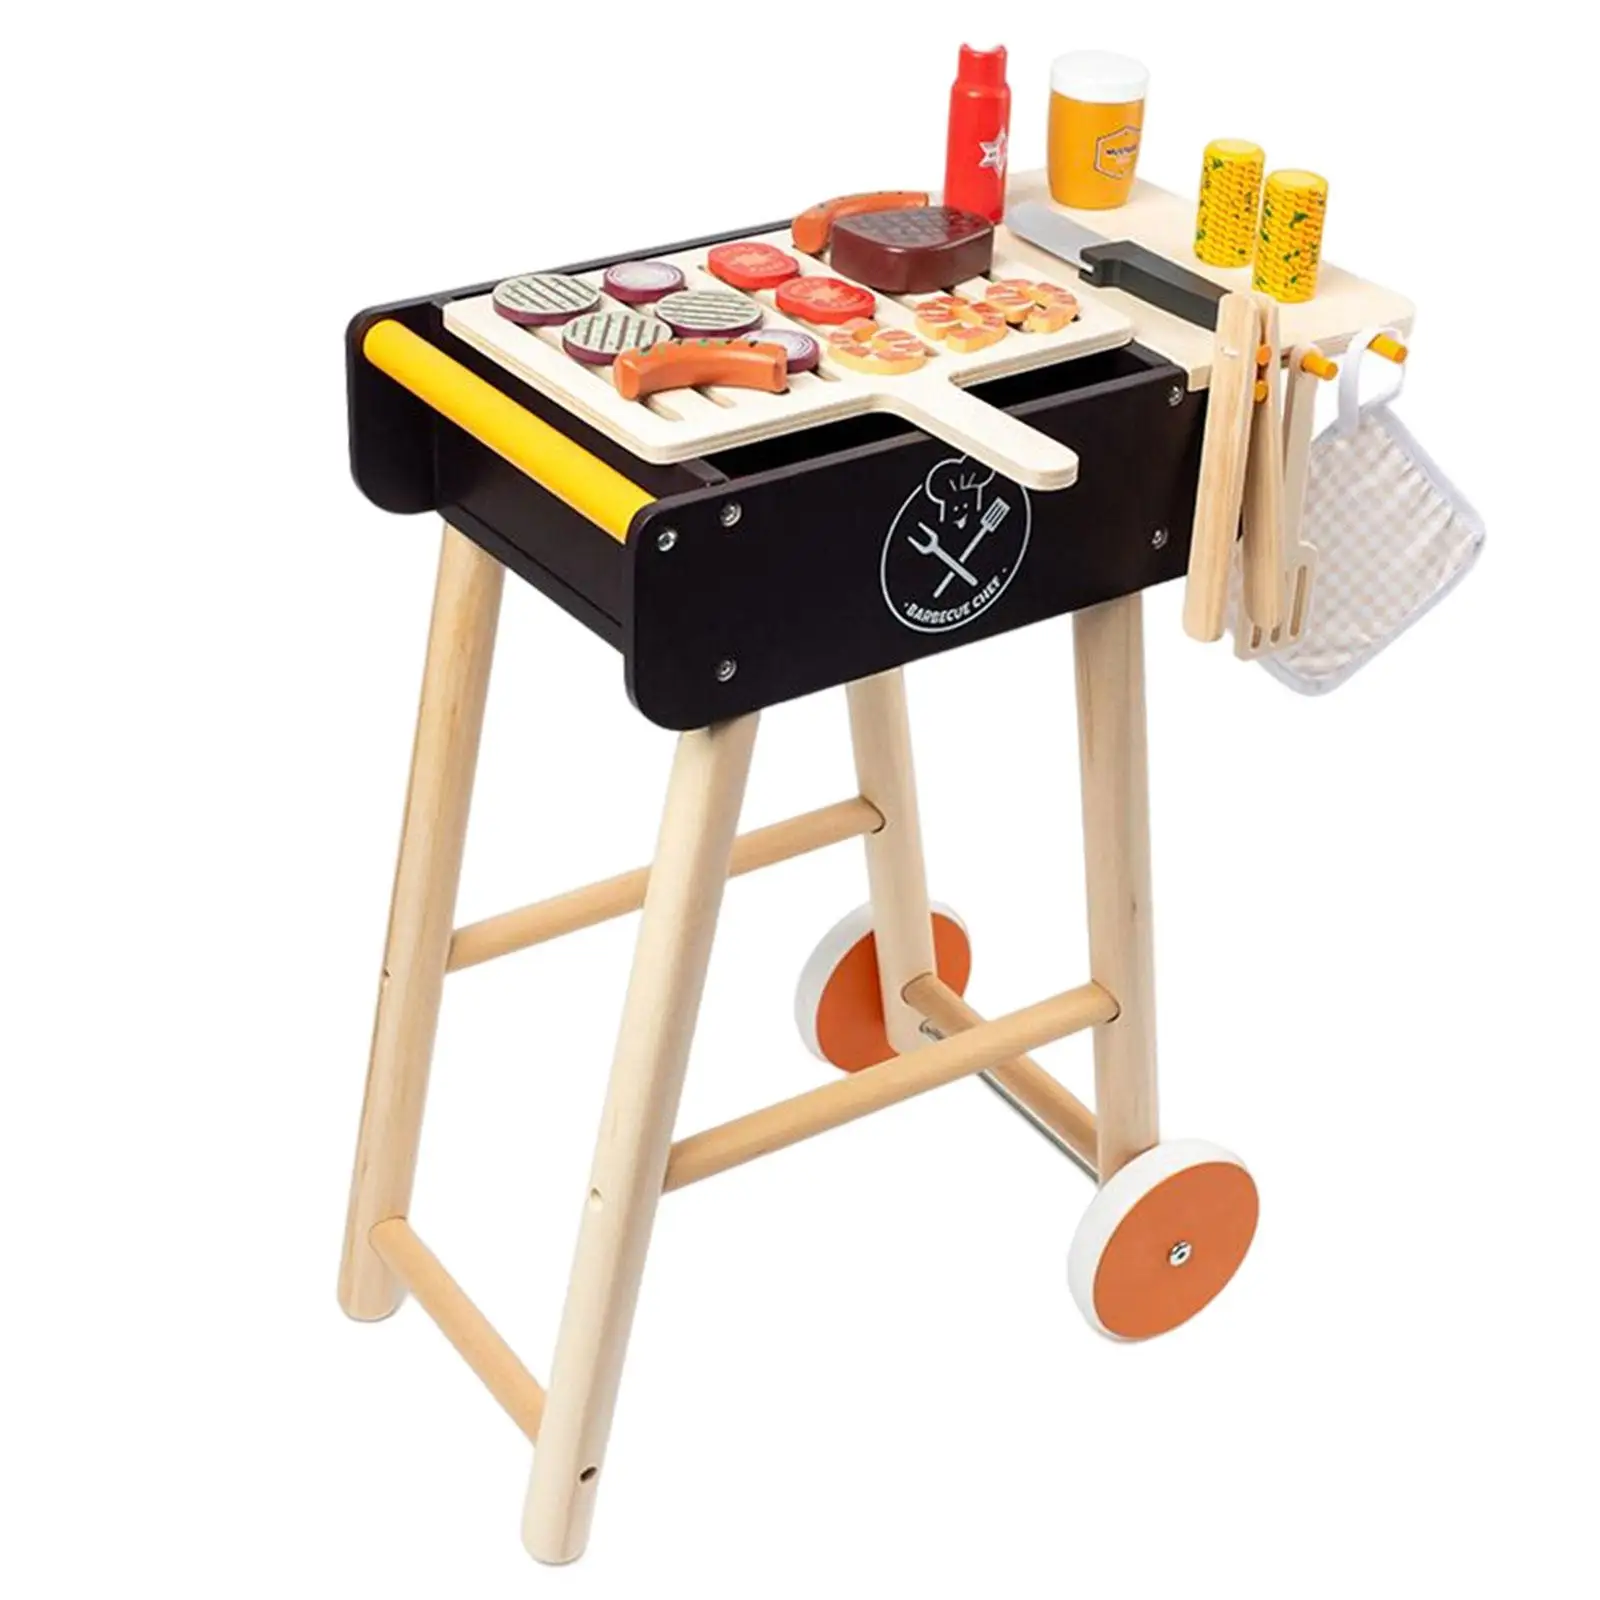 Kitchen BBQ Playset Pretend Play Role Game Cooking Playset for Children